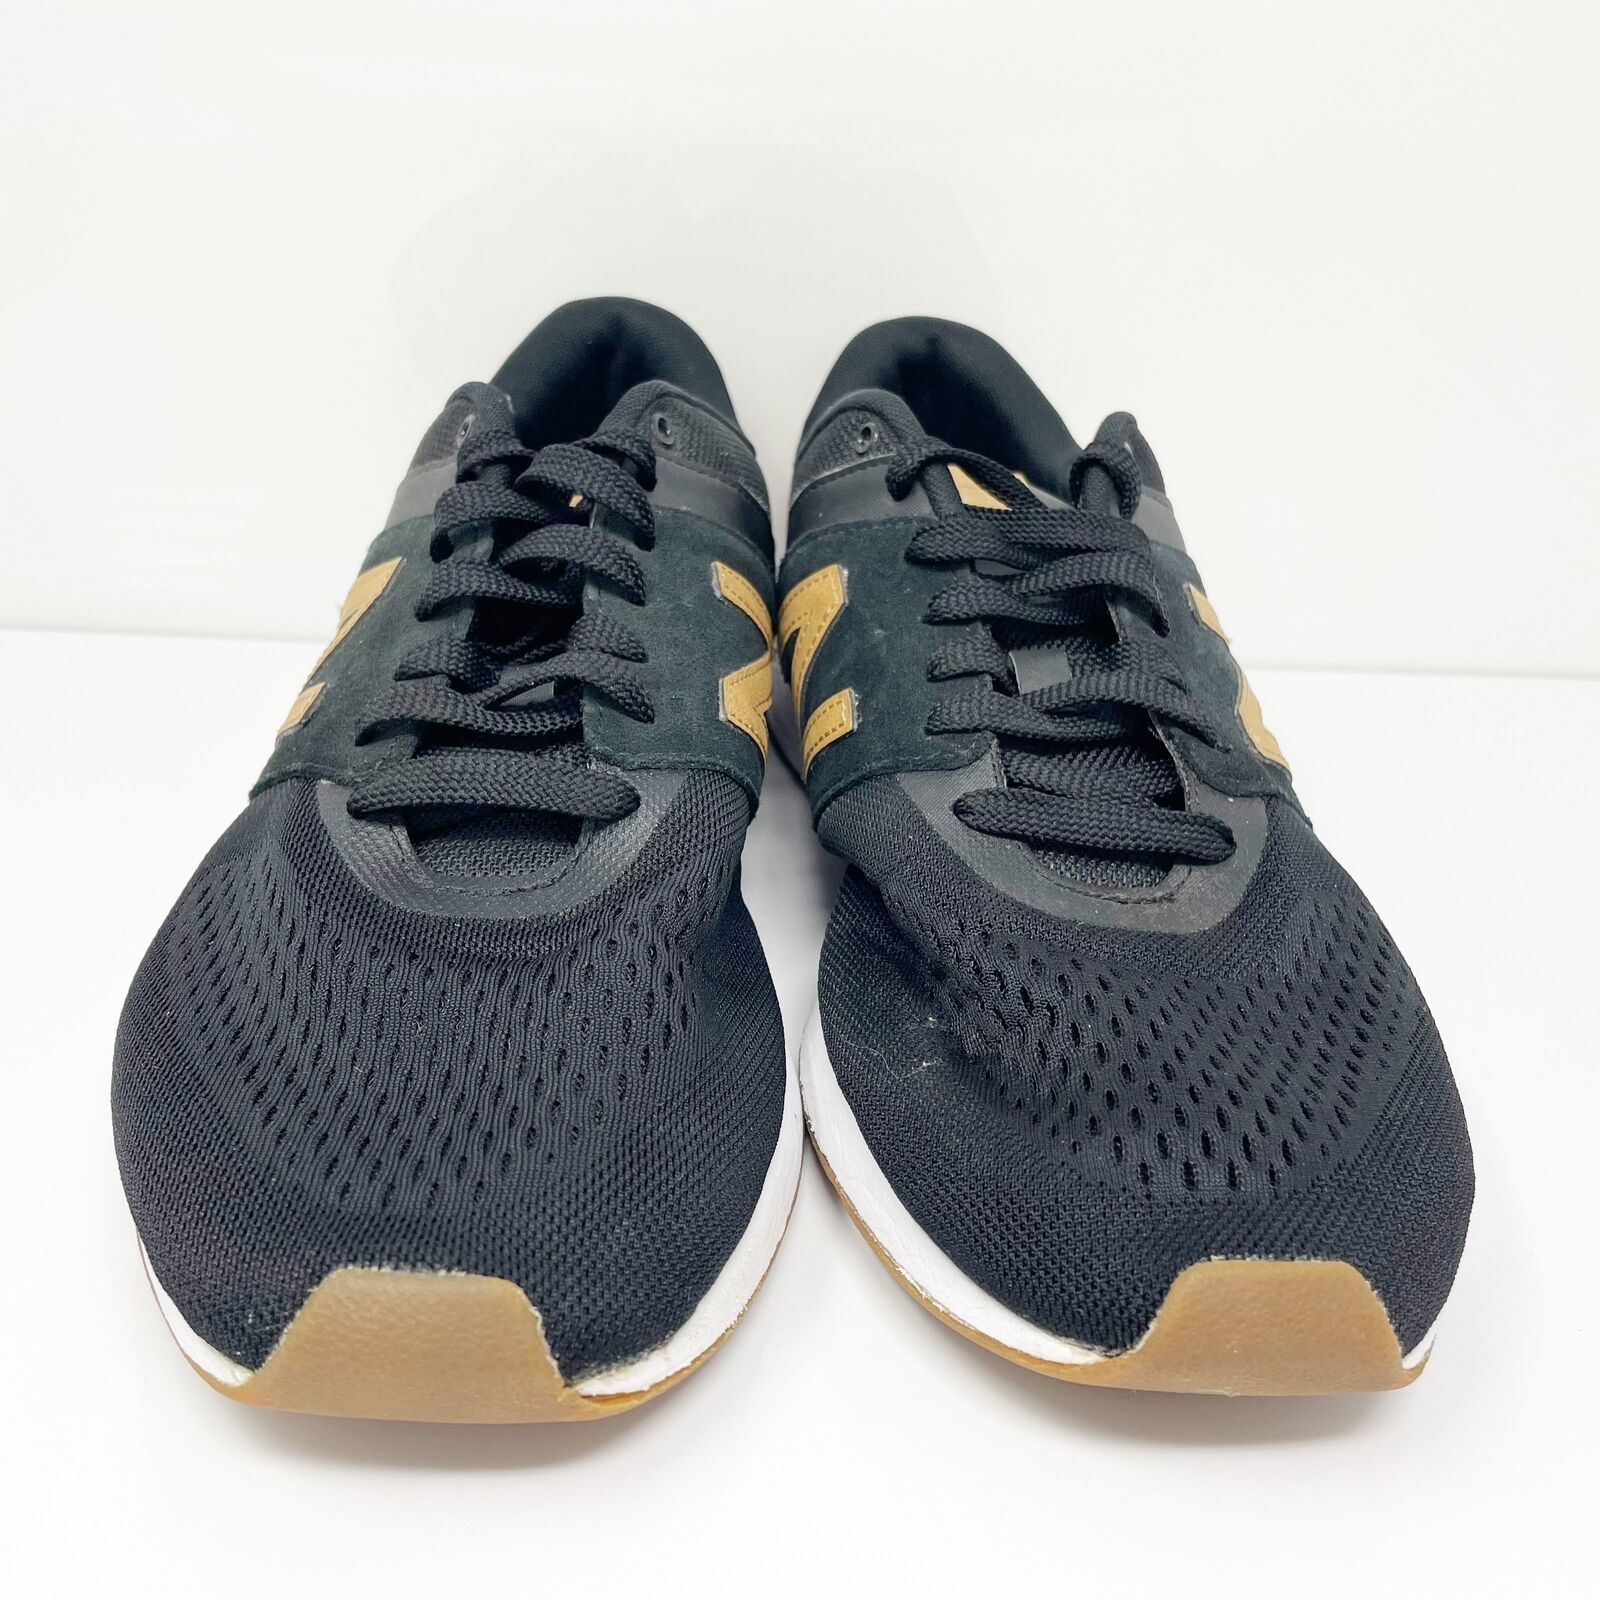 New Balance Mens 24 MRL24CRA Black Running Shoes Sneakers Size 13 D ...